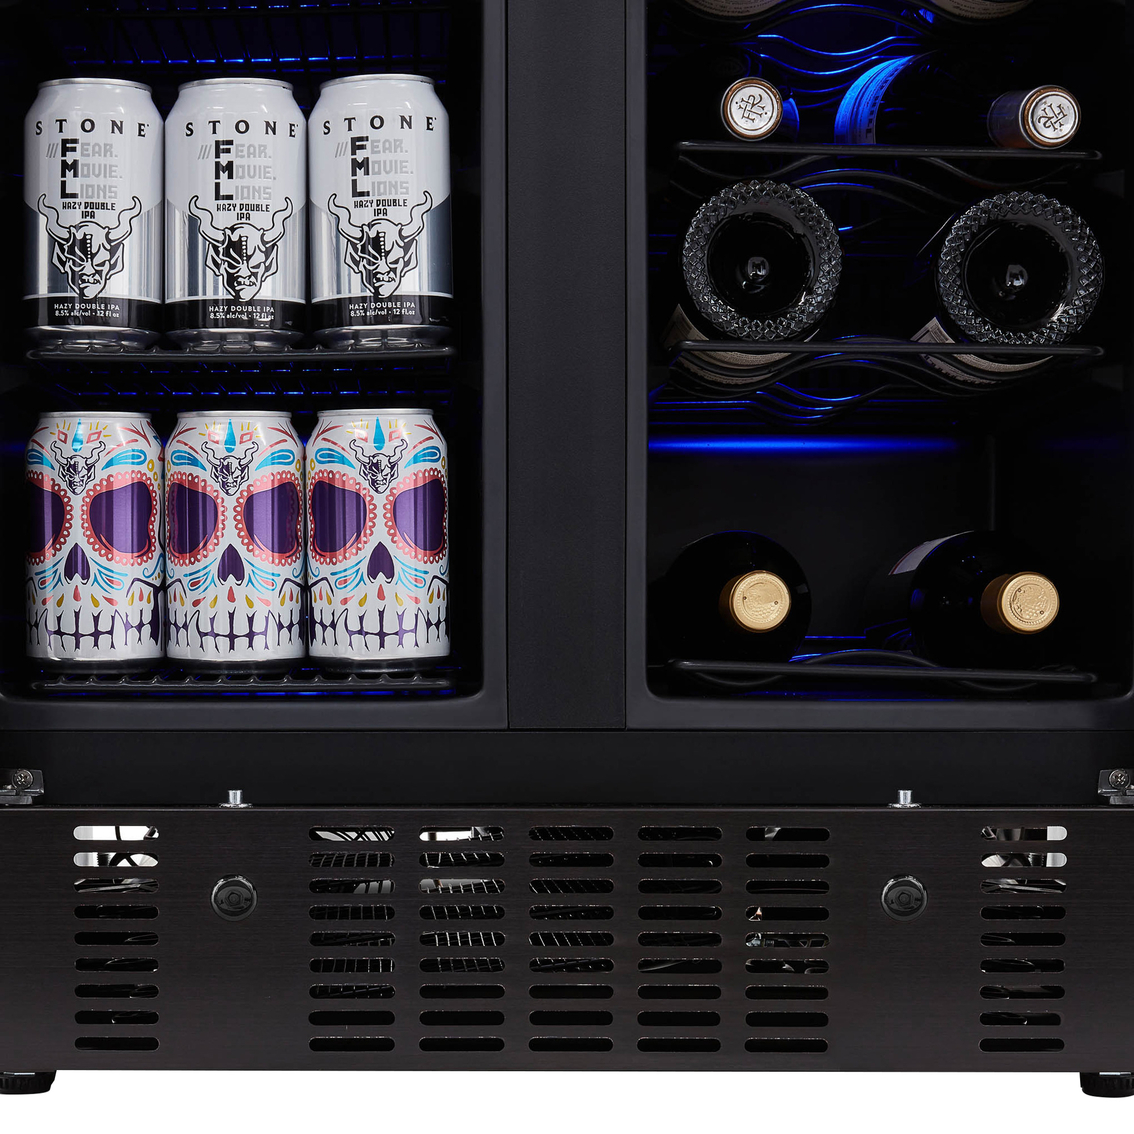 Newair 24 in. Built in Dual Zone Wine and Beverage Refrigerator and Cooler - Image 9 of 10